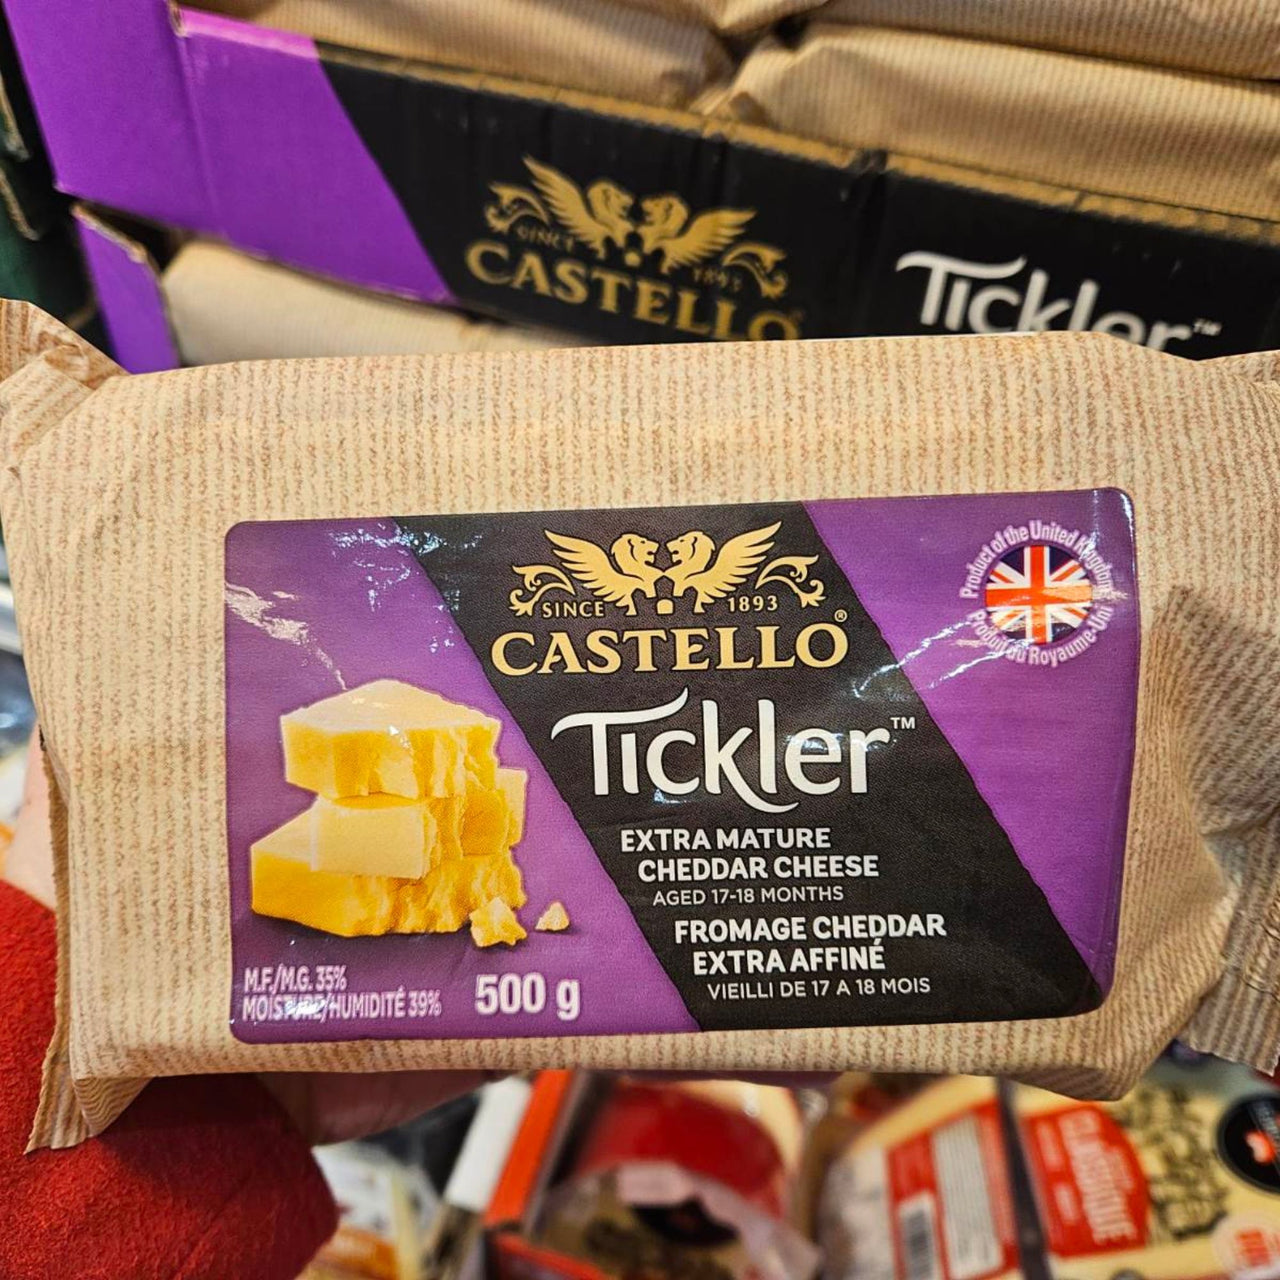 Cheddar, Everything you need to know about Cheddar, Castello